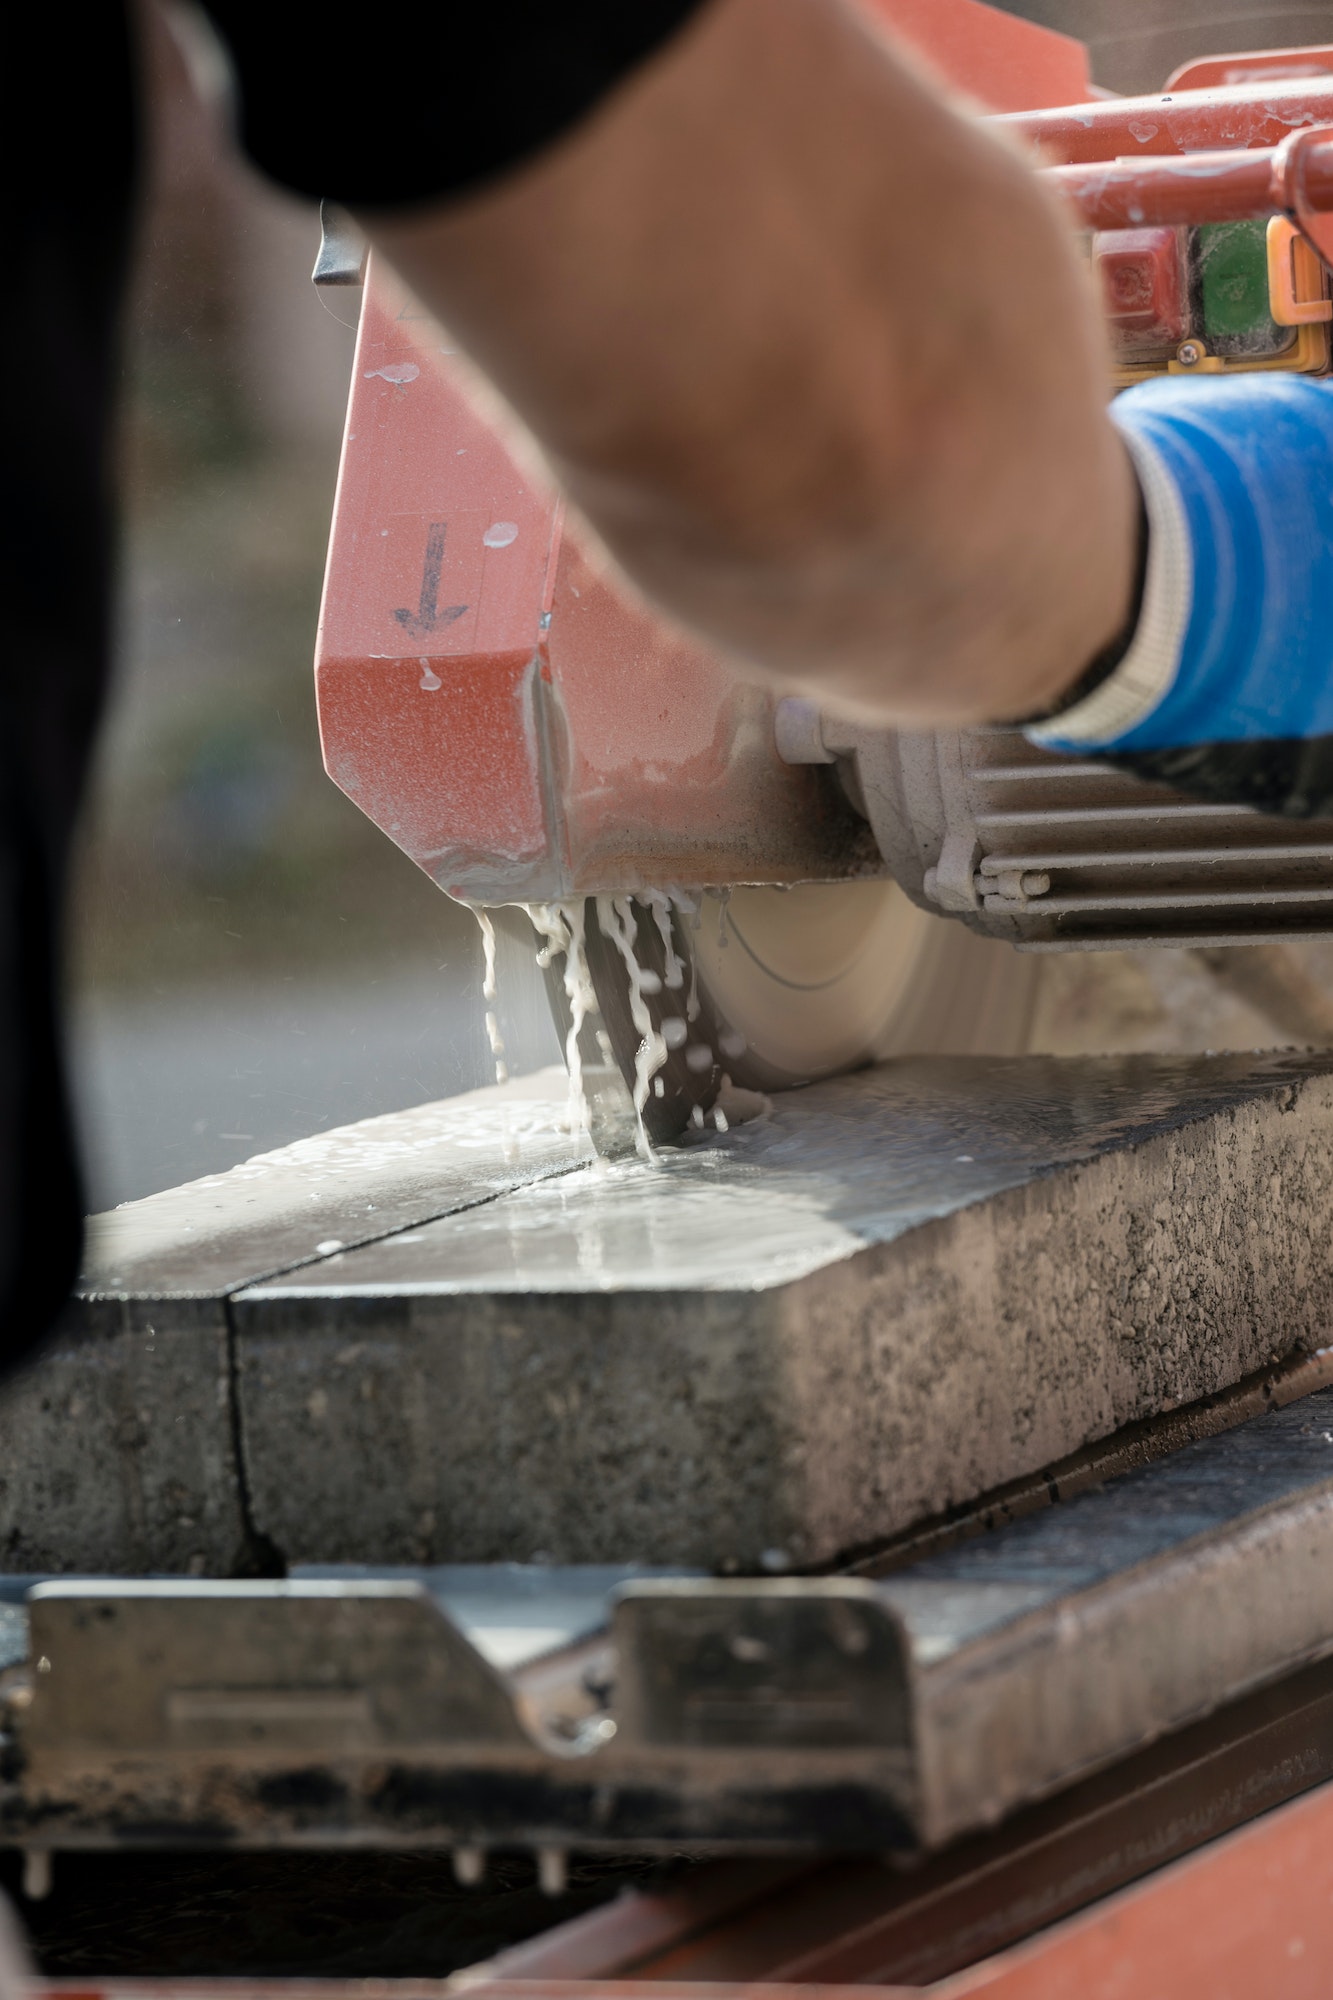 Workman using an angle grinder to cut a concrete block in a rear view